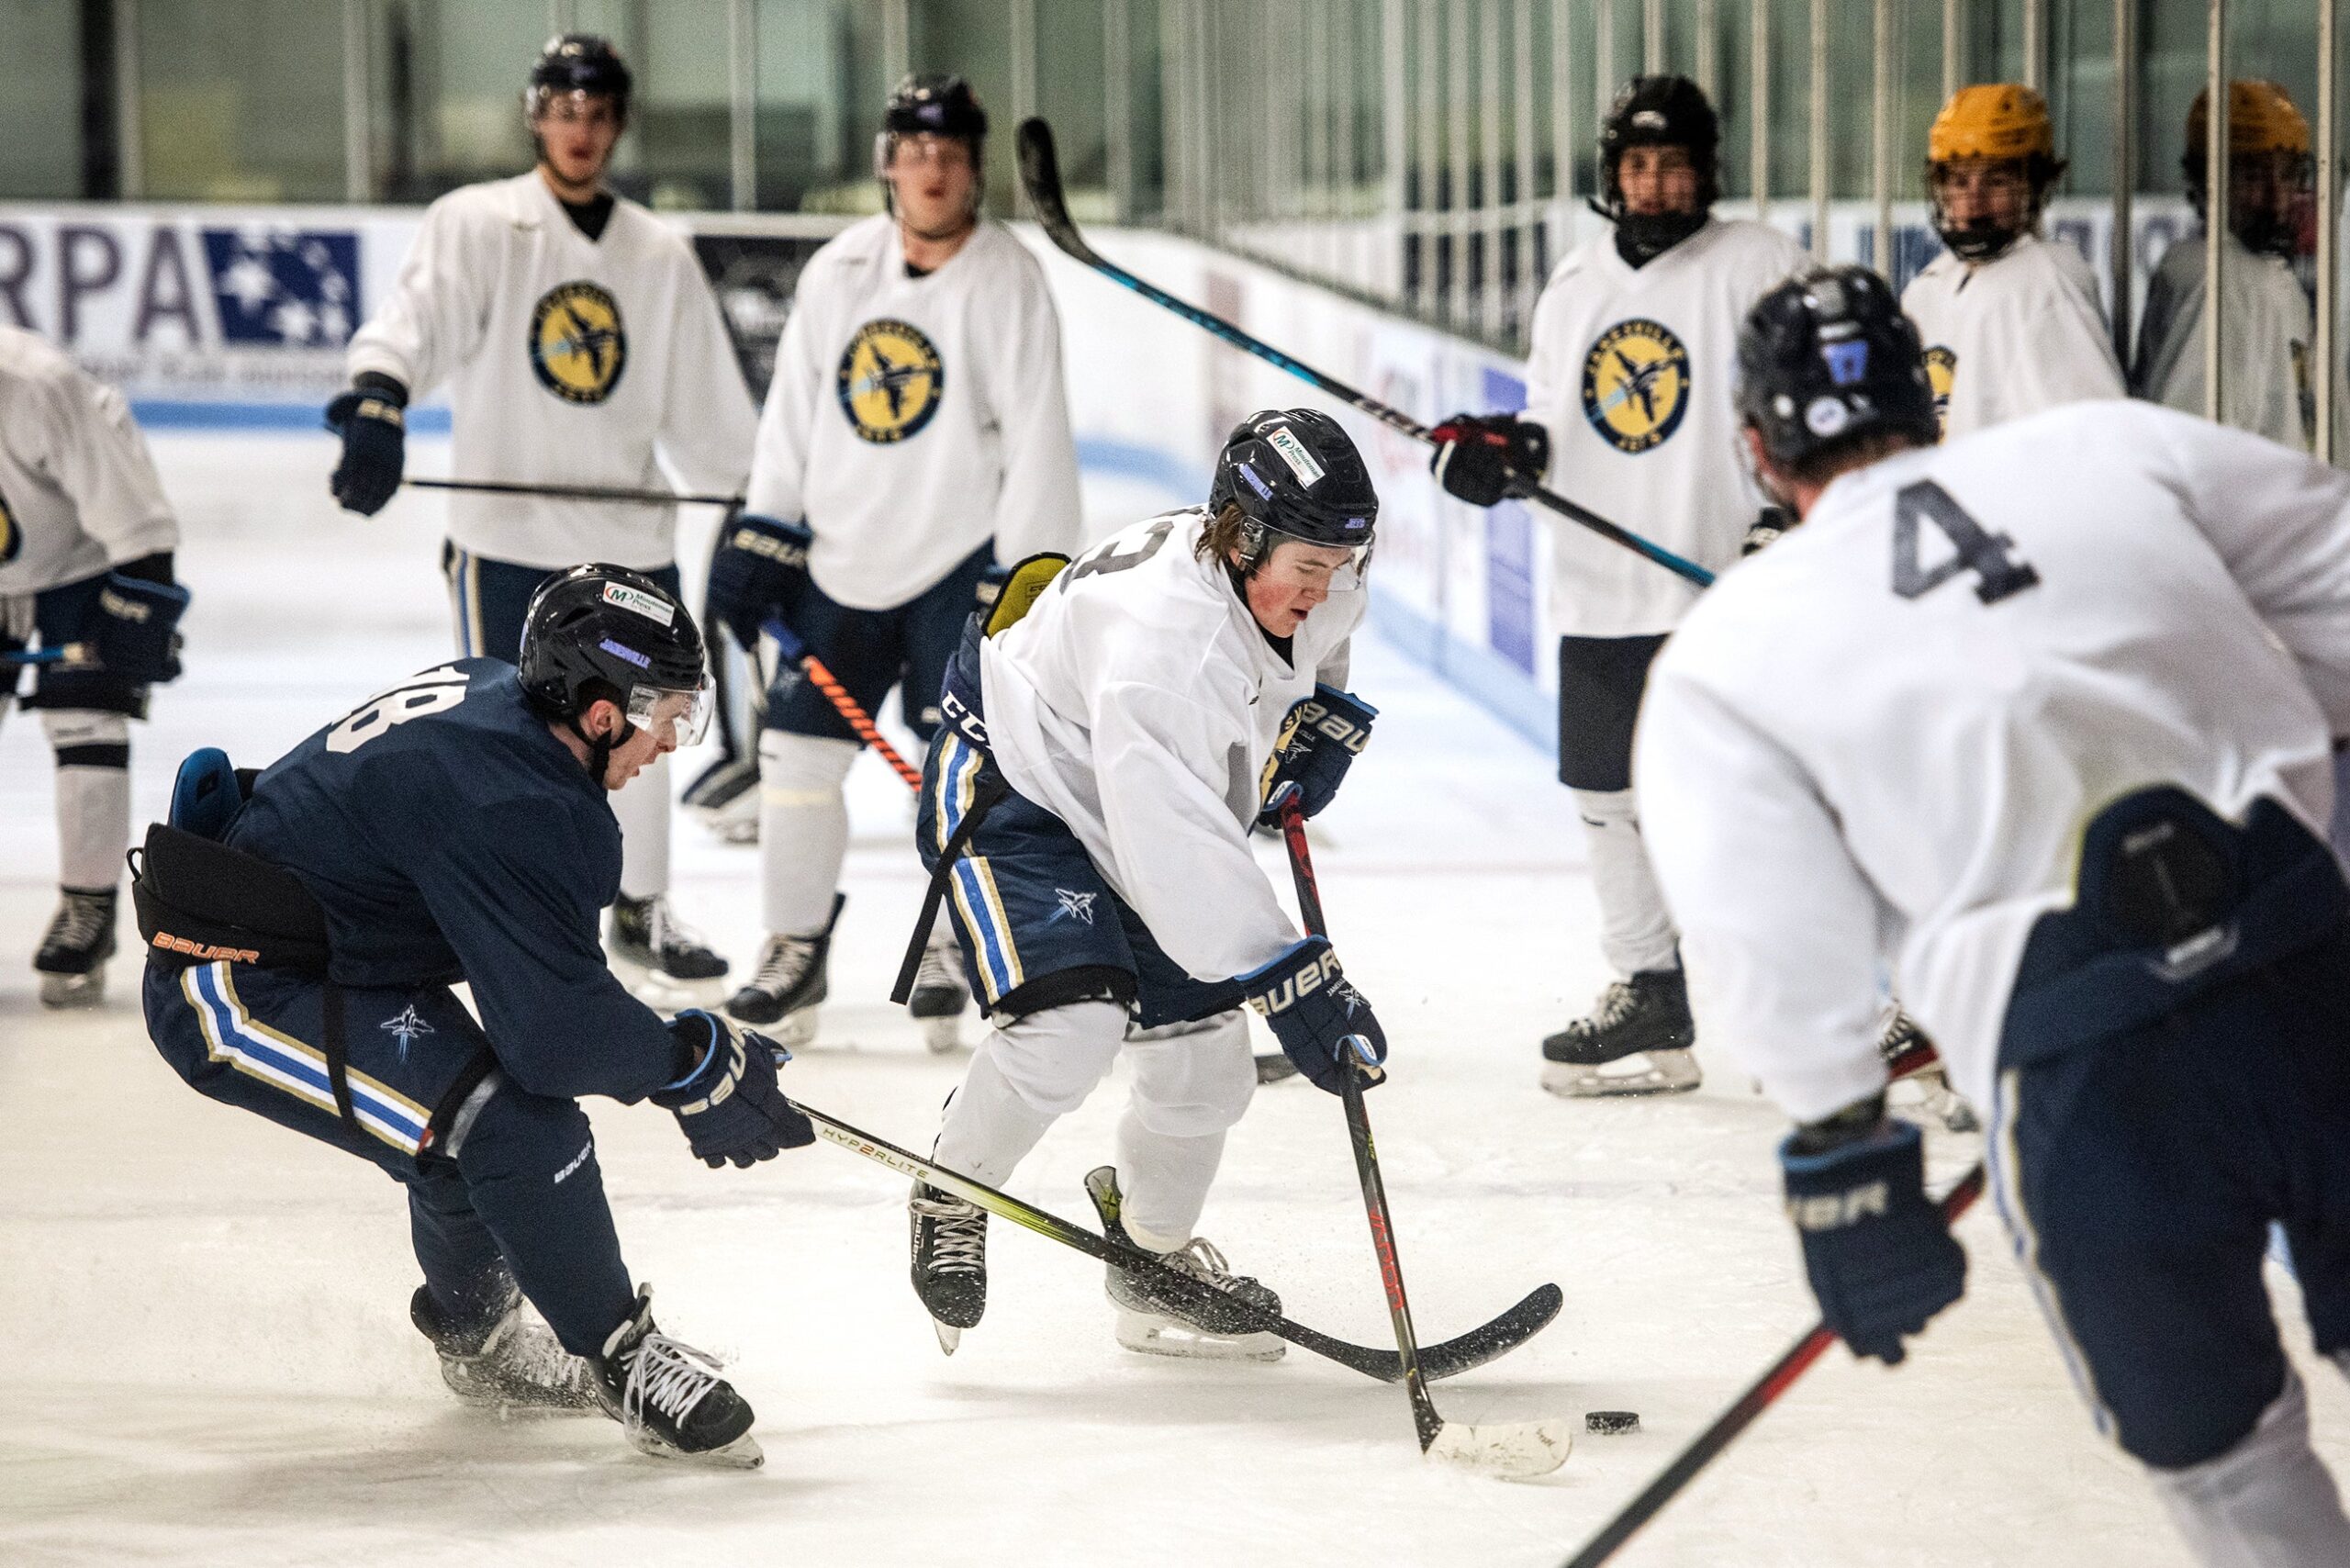 Several players fight for the puck on the ice during practice.